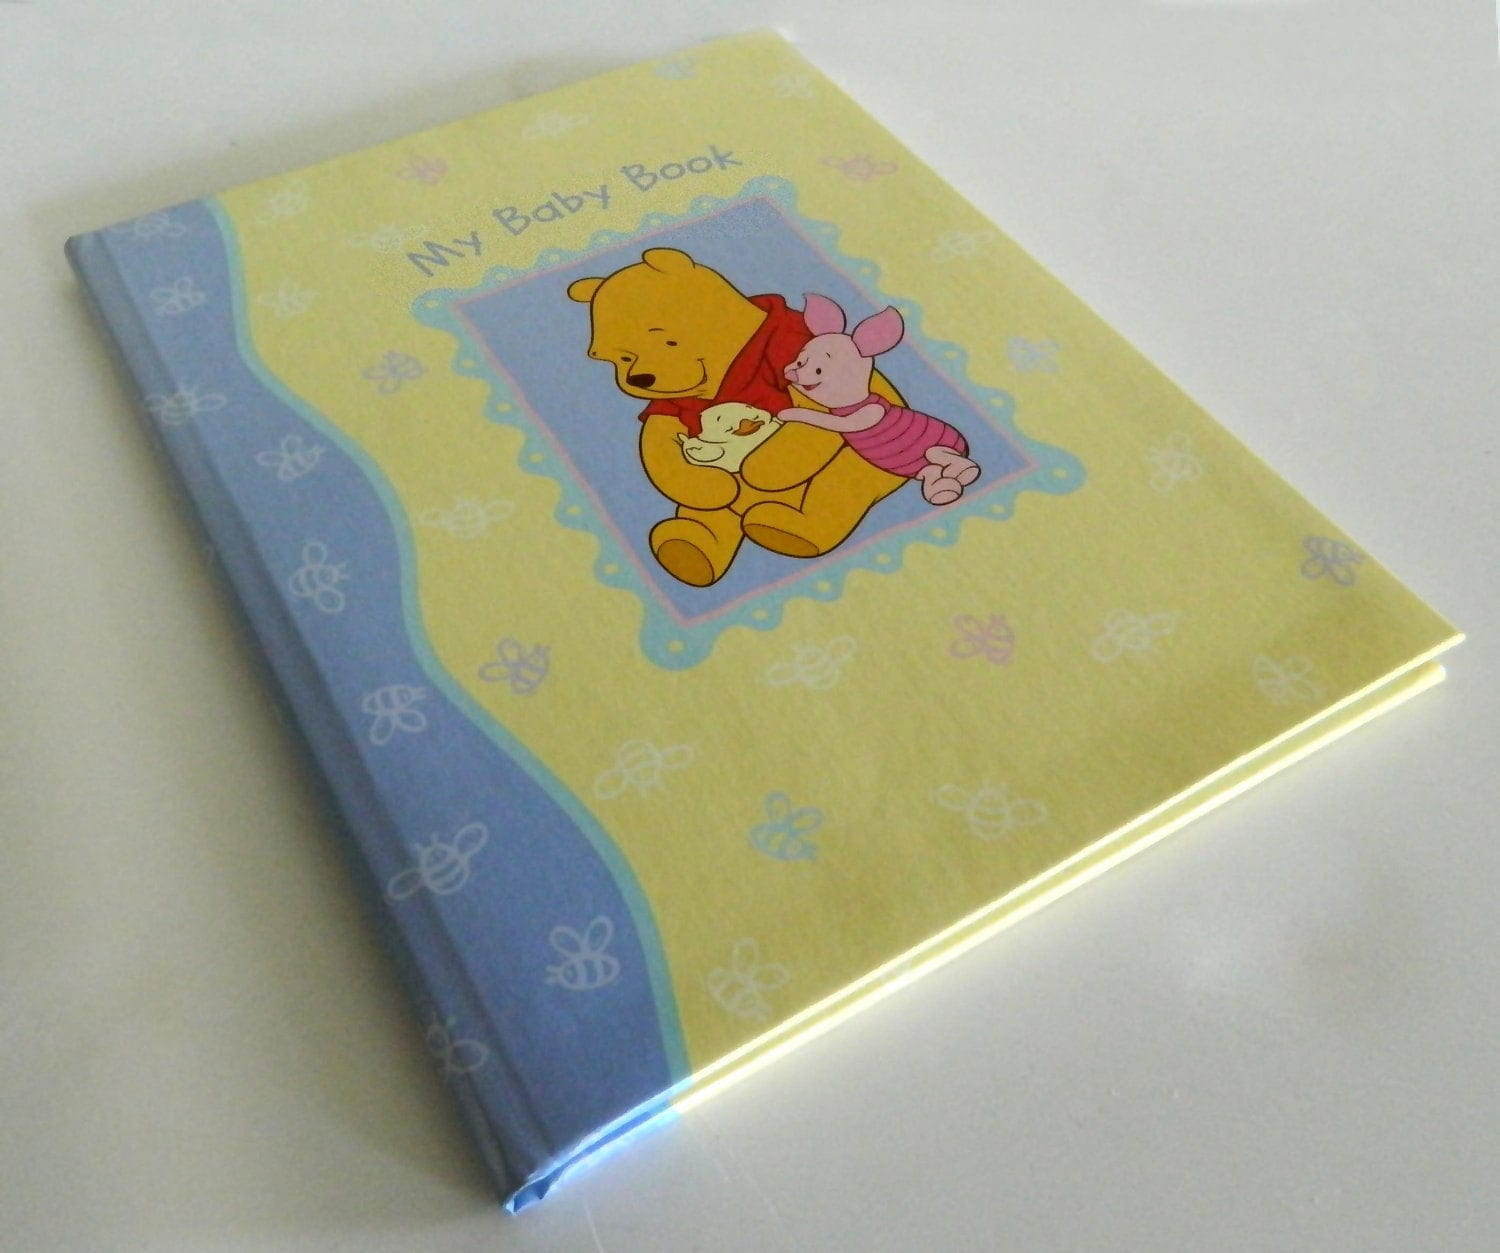 499+ baby winnie the pooh characters